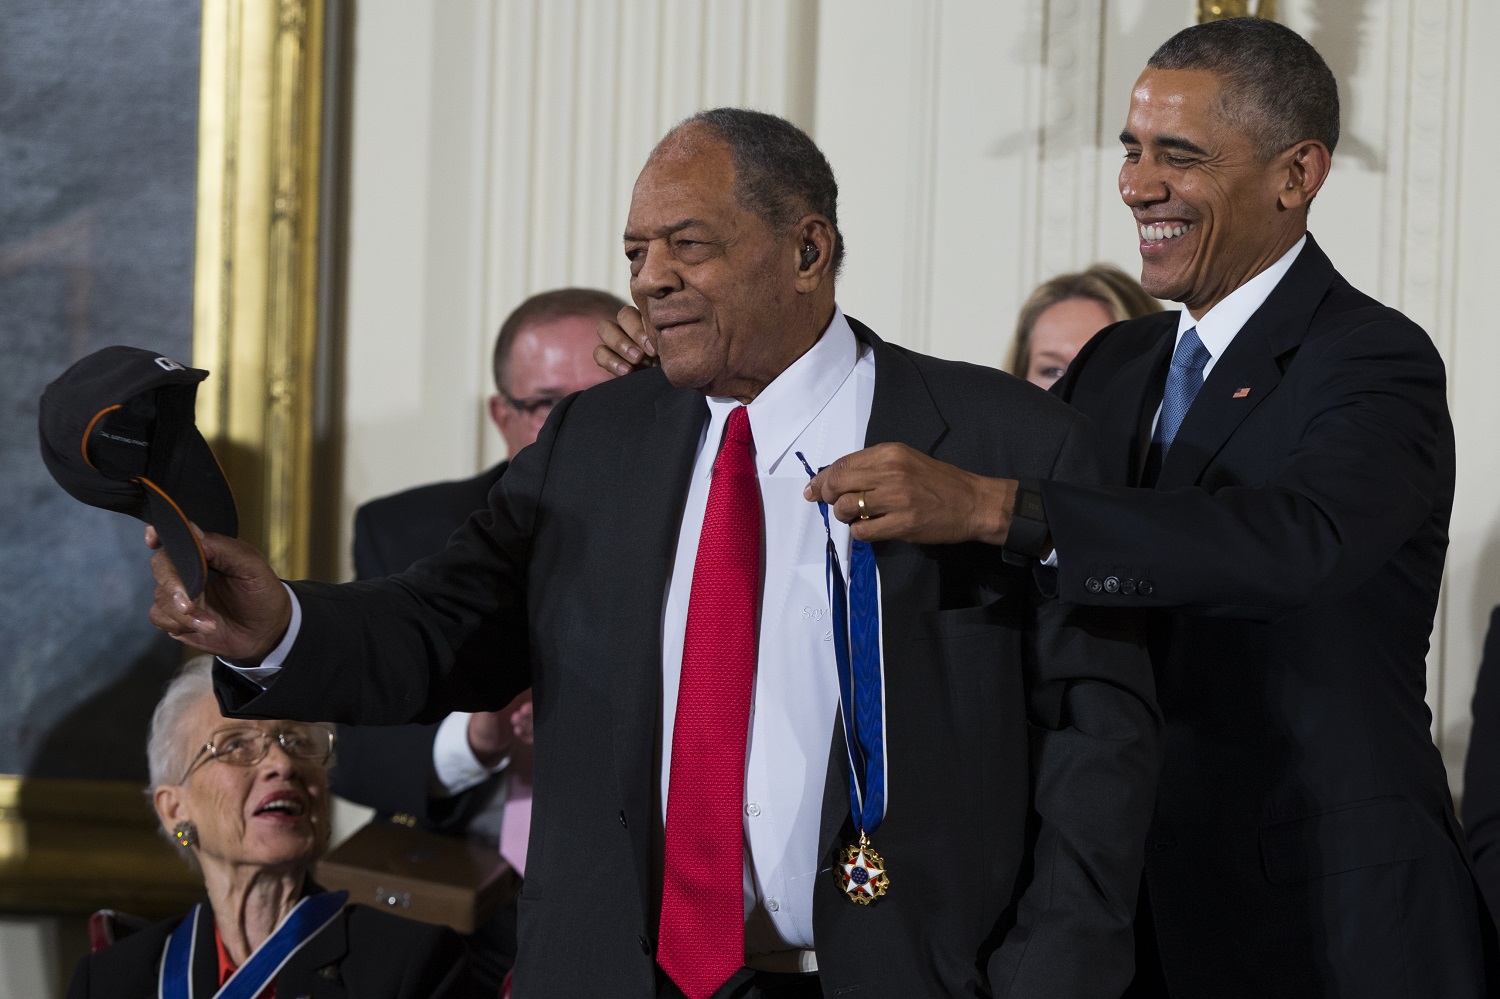 Obama honors Mays, Berra with Presidential Medal of Freedom